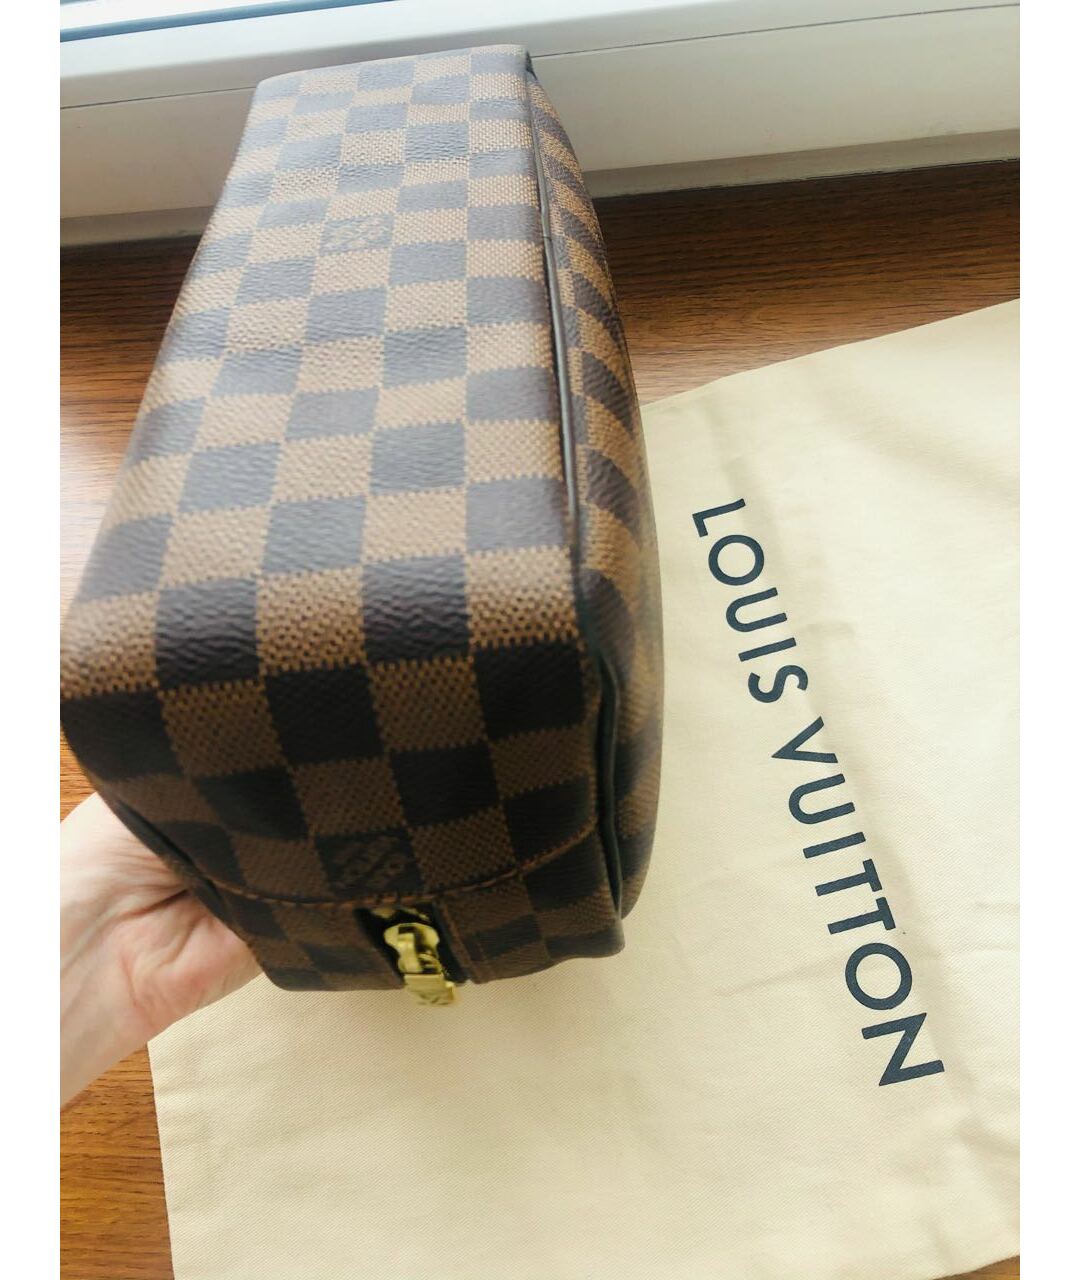 LOUIS VUITTON PRE-OWNED Коричневая косметичка, фото 2